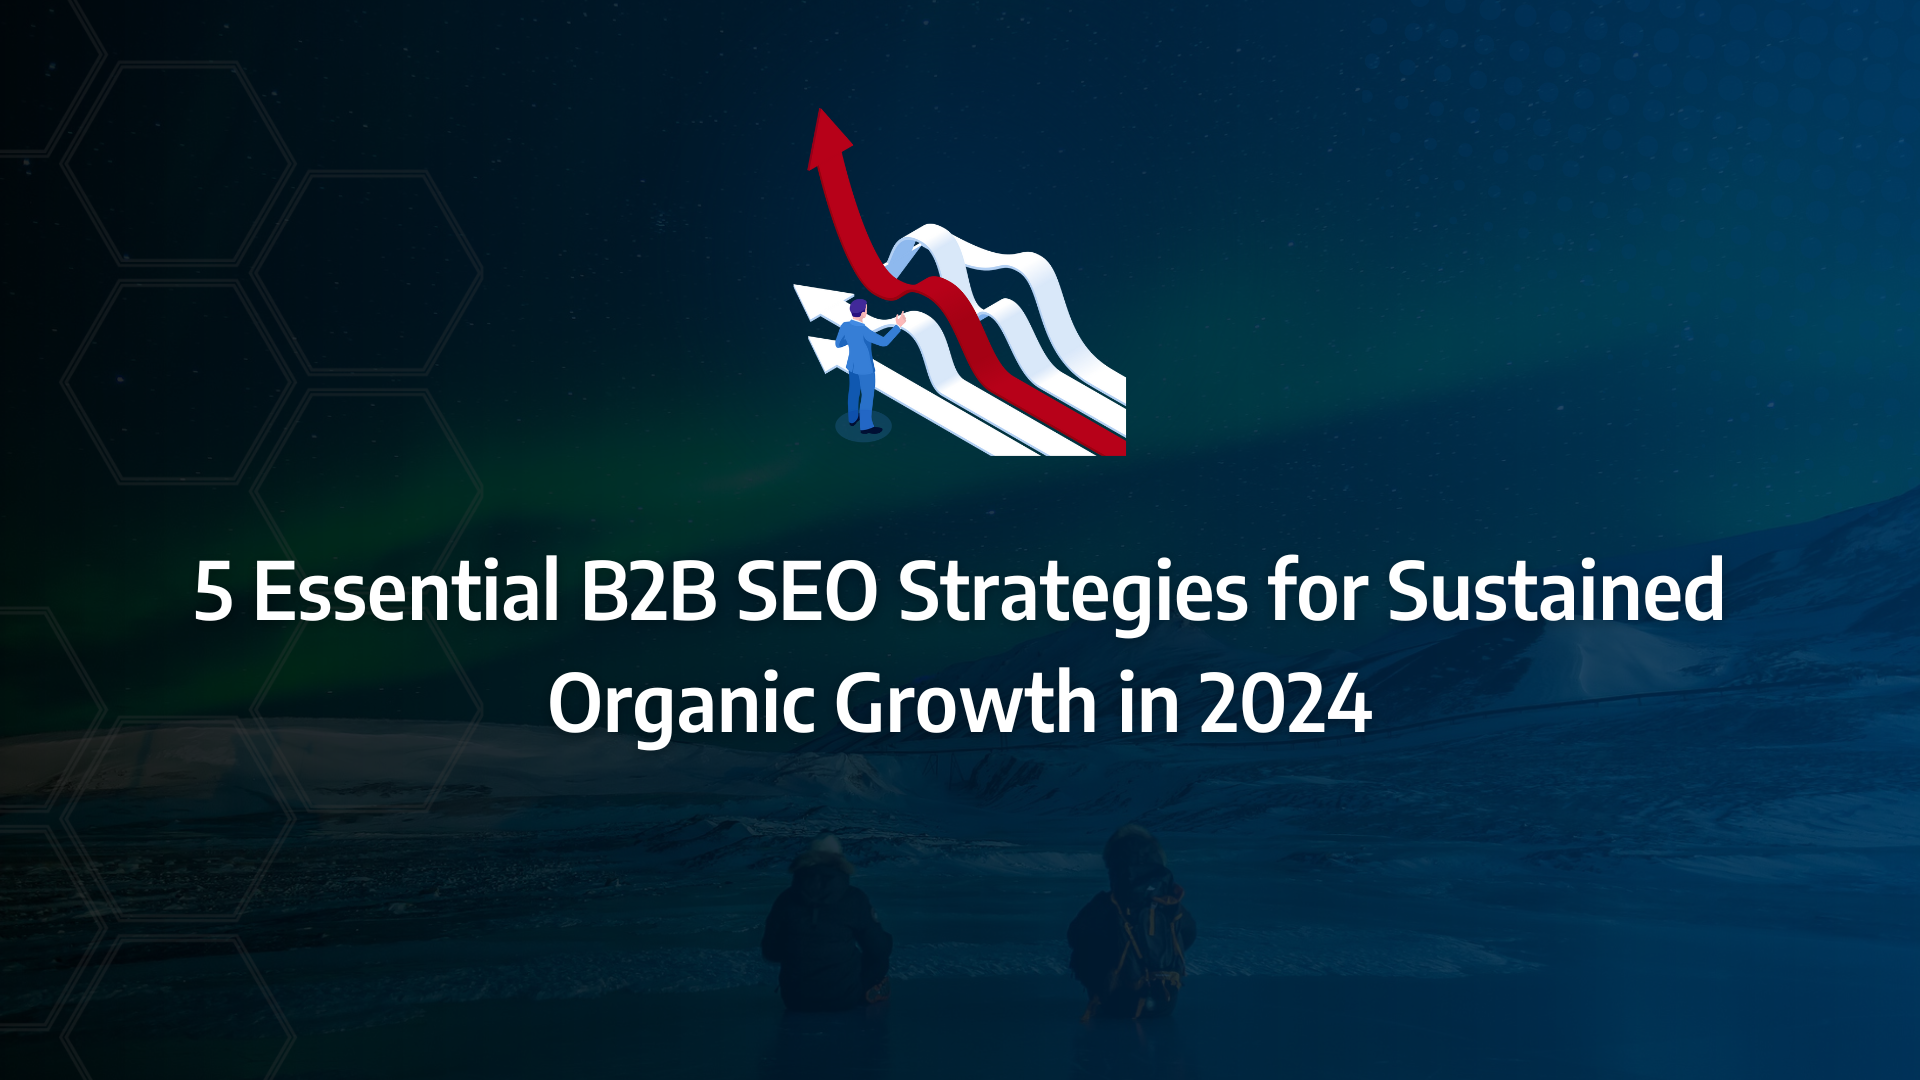 the ultimate guide to b2b seo strategies incorporating technical seo, search intent, keyword volumes, content strategy, organic traffic, seo audit